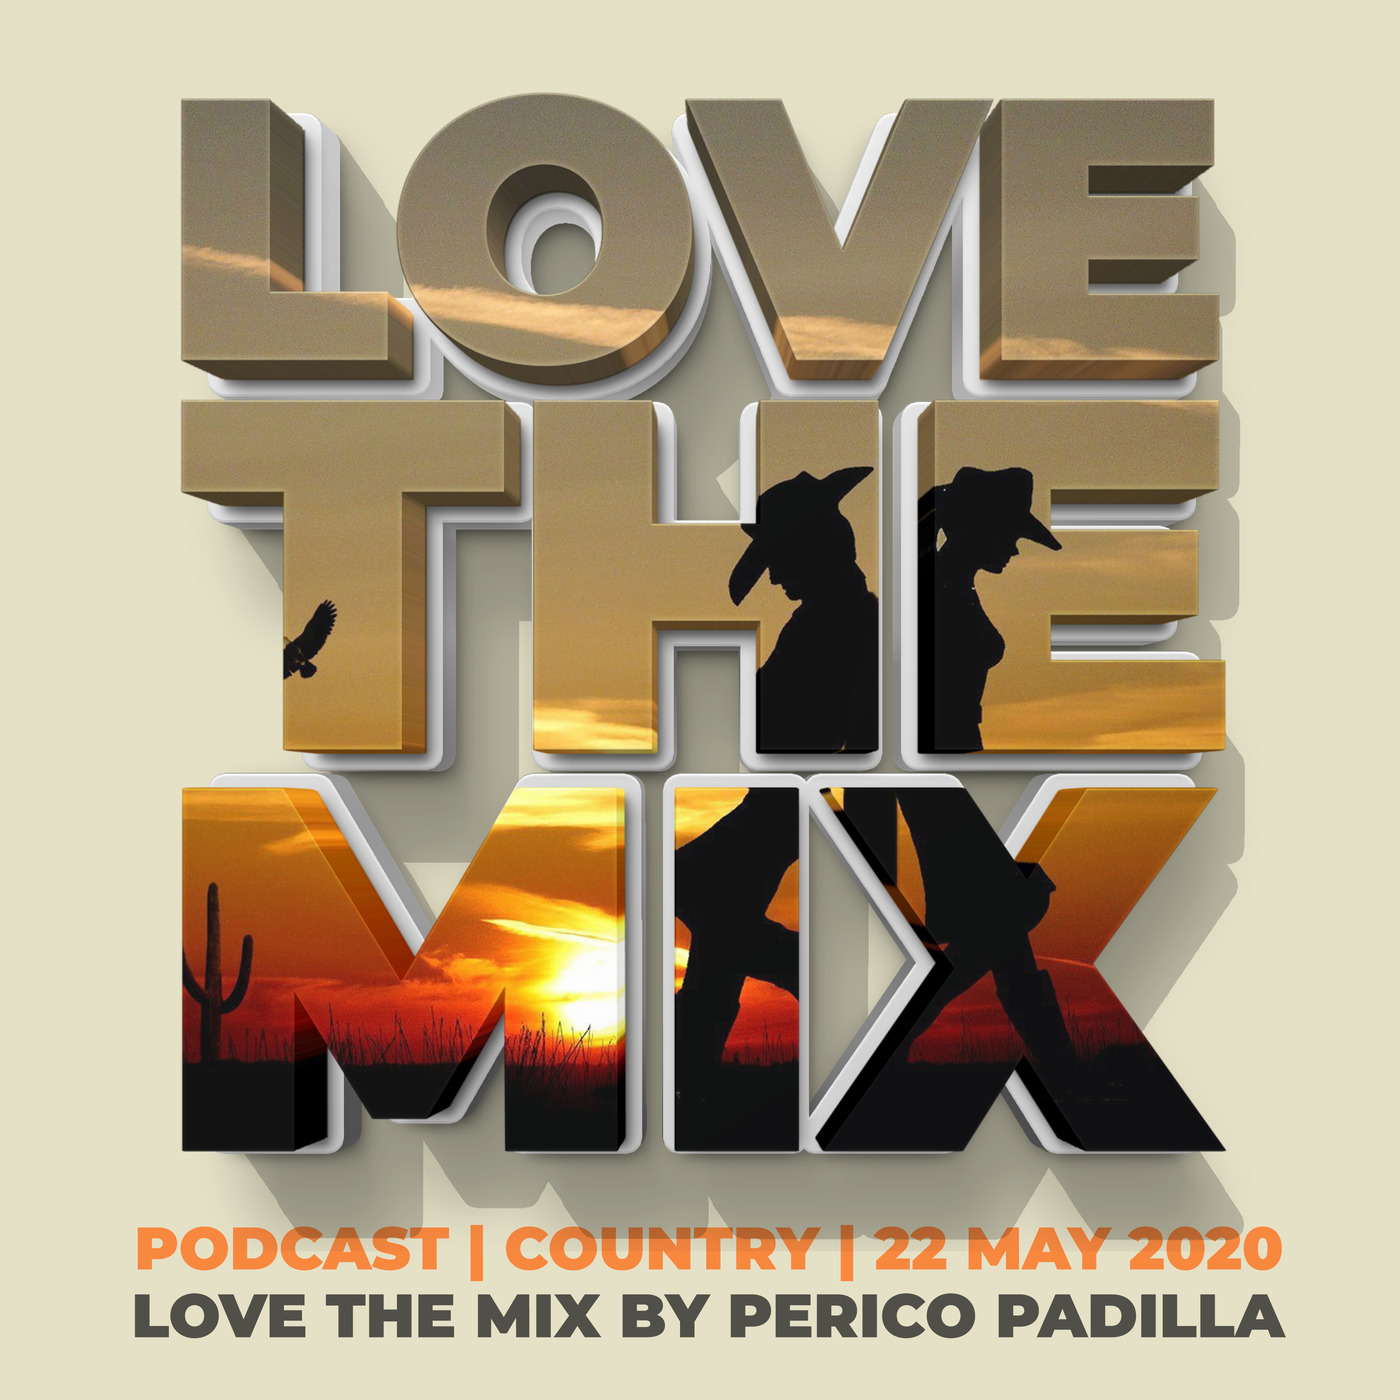 LOVE THE MIX PODCAST | COUNTRY | 22 MAY 2020 By Perico Padilla